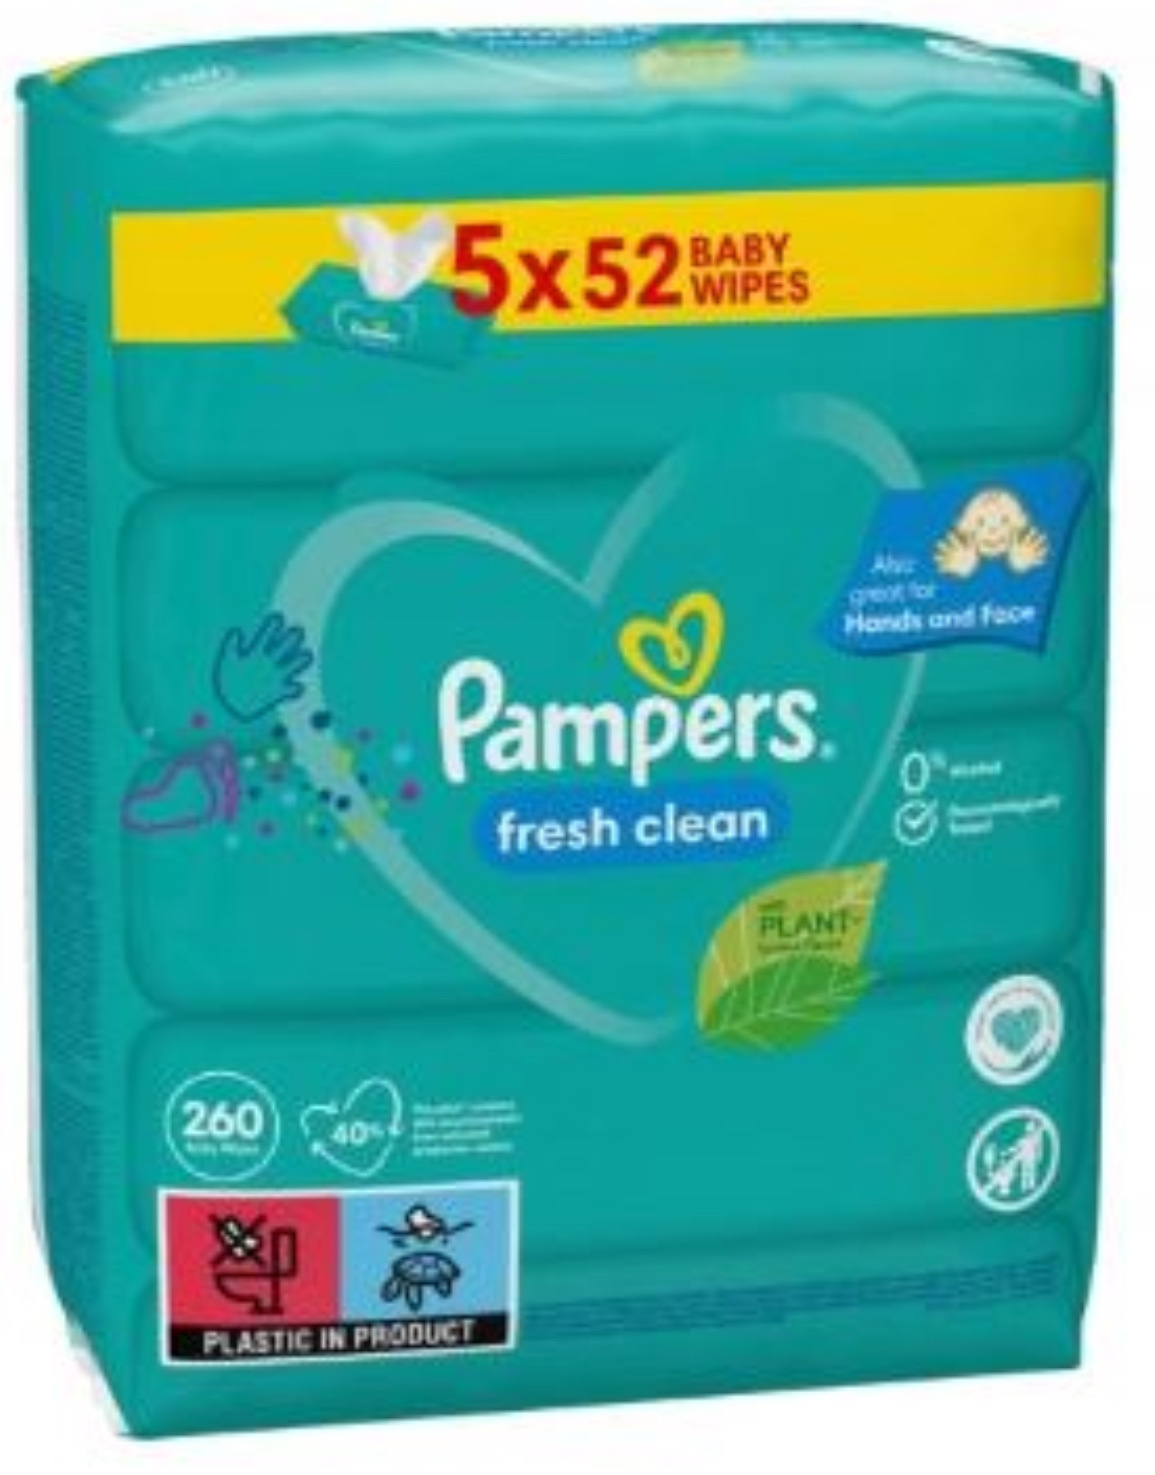 intermarché pampers